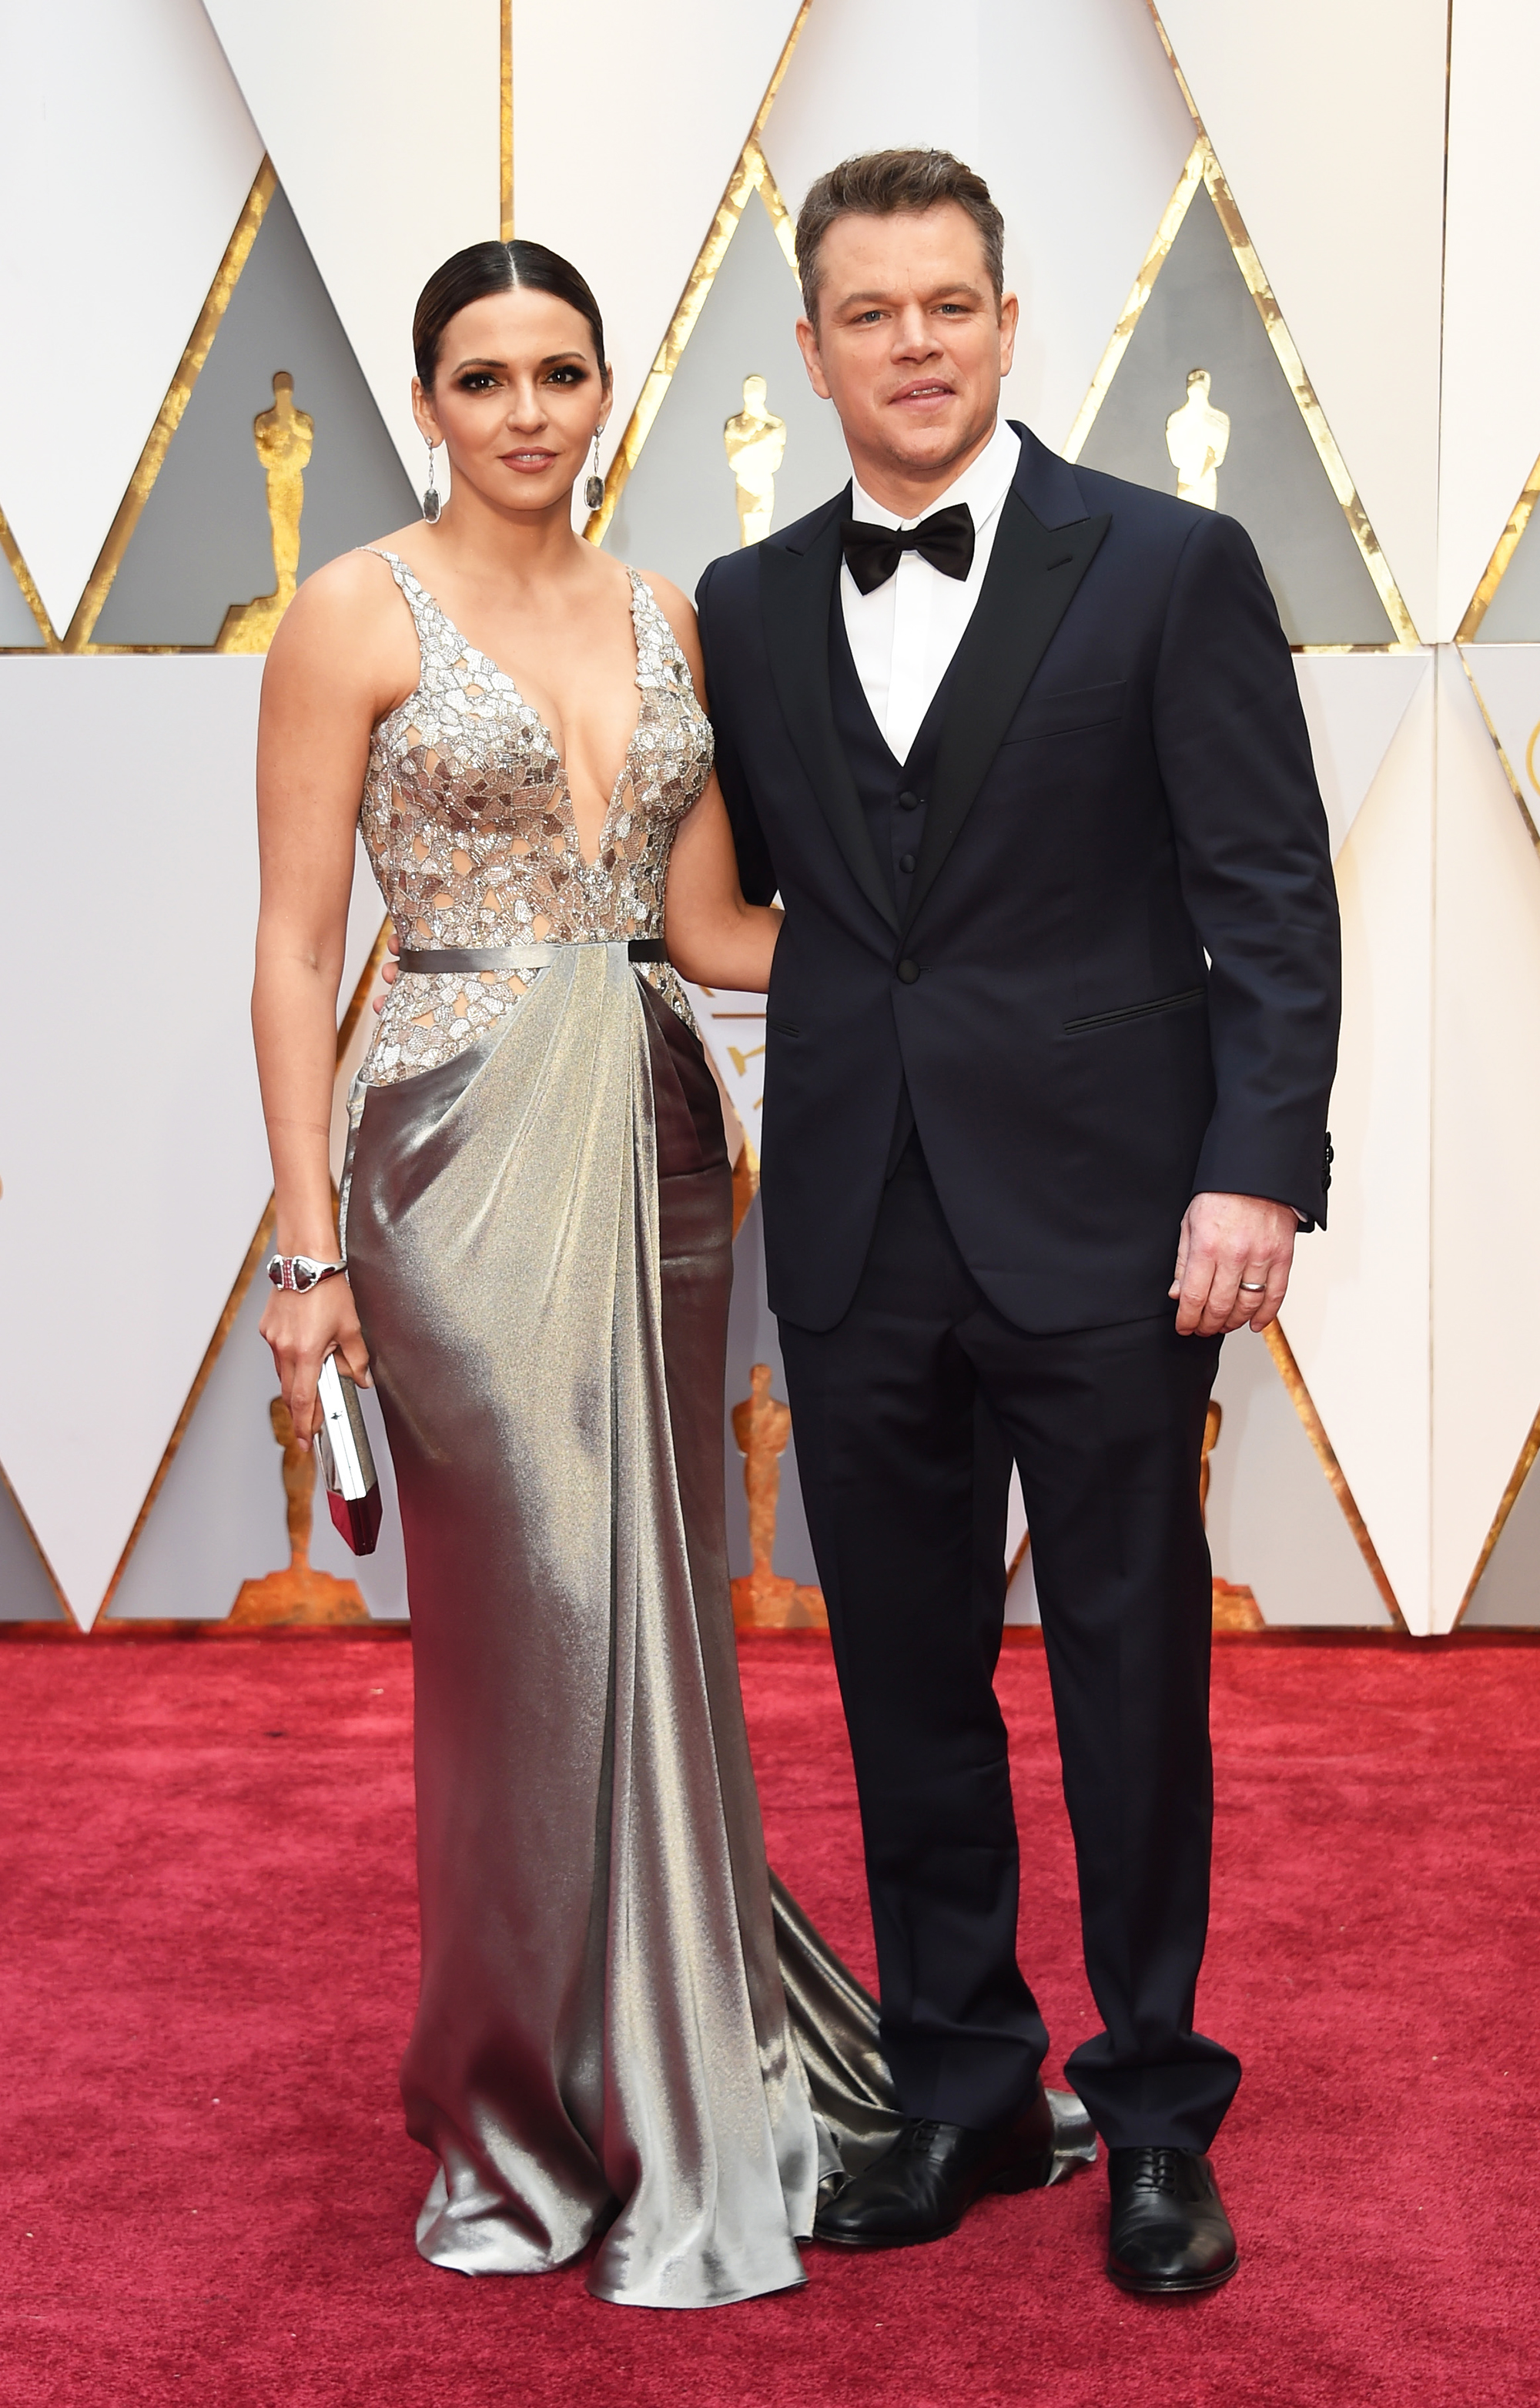 Luciana Barroso and Matt Damon on the red carpet for the 89th Oscars, on Feb. 26, 2017 in Hollywood, Calif.